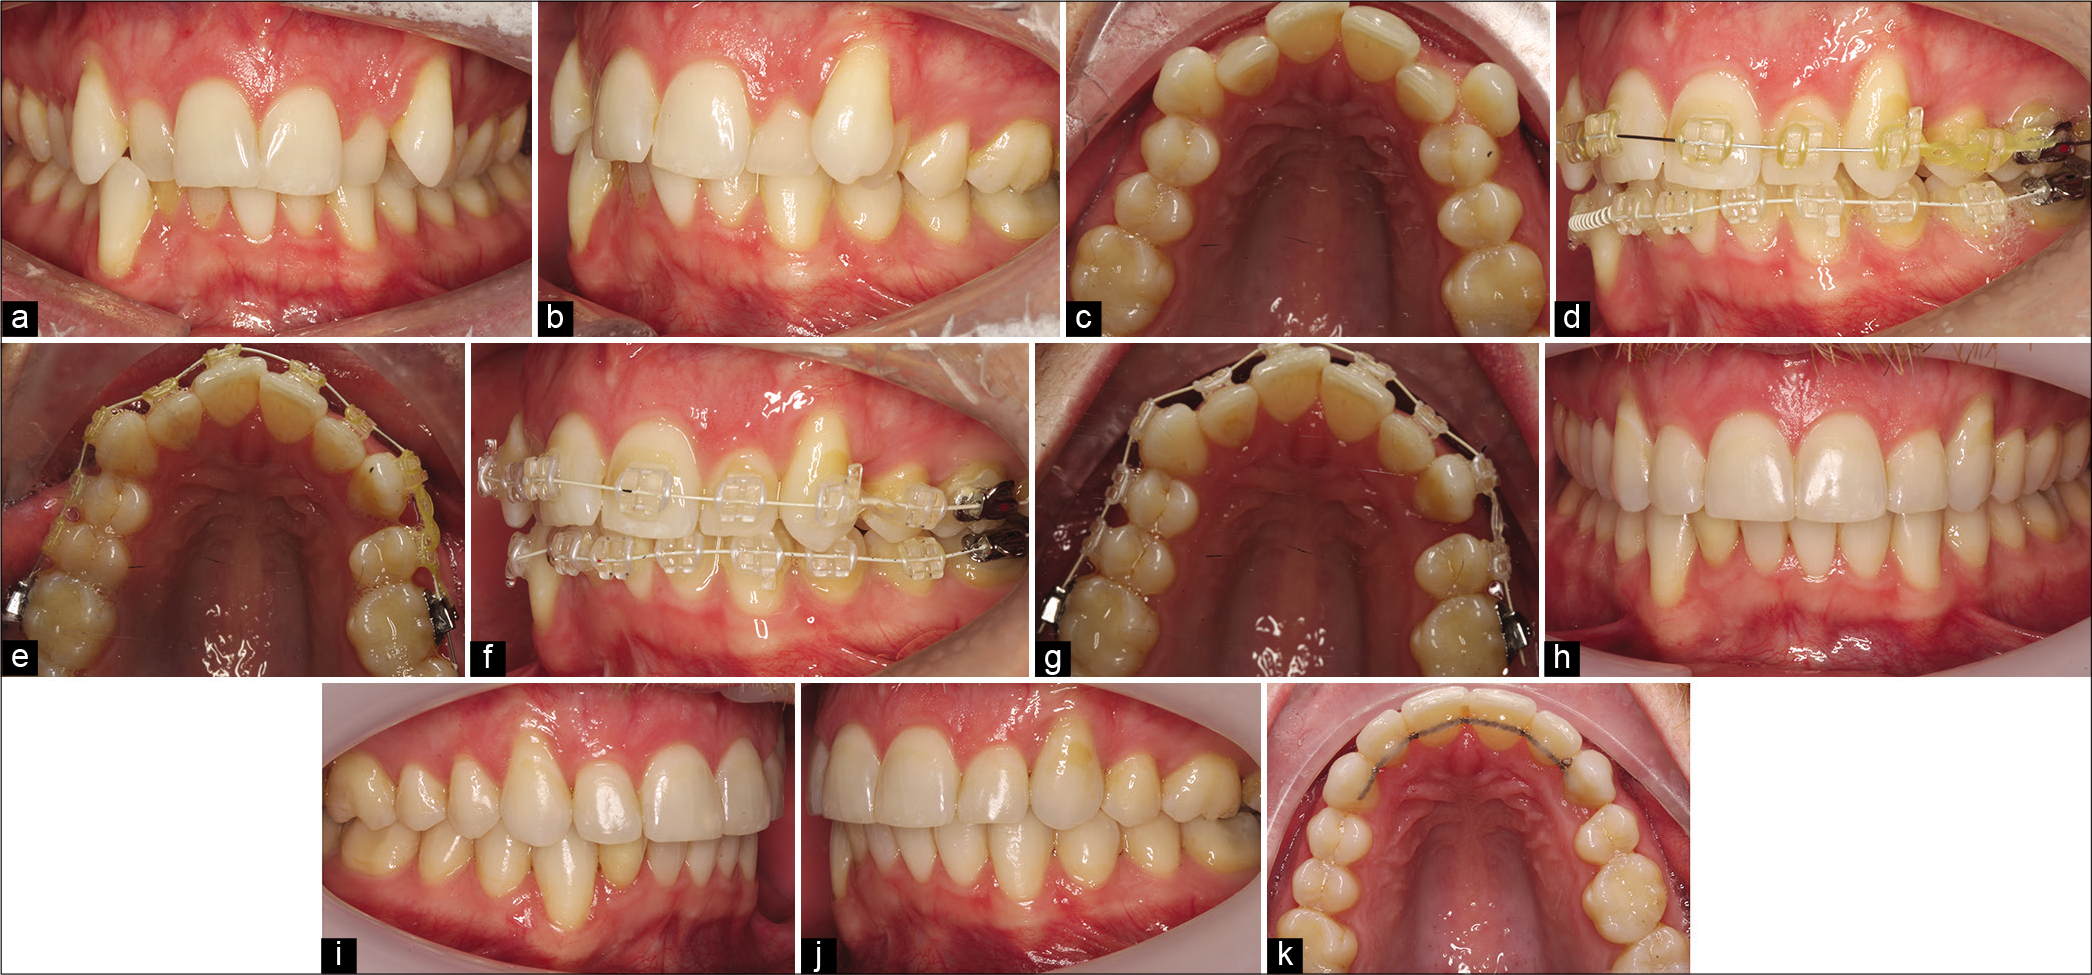 A Class I malocclusion with dual-arch crowding, asymmetric molar relationships, and thin gingival biotype (a-c). Treatment involved upper and lower fixed appliances with loss of 24 in isolation to facilitate relief of crowding, alignment, and improvement of the midline shift. Immediately following extractions, light elastomeric chain was used locally to align 23 and to facilitate early space closure in this adult patient. At 6-week review (d and e), dramatic space closure had already been achieved with a significant excess of wire distal to 26. Very light elastomeric chain was subsequently reapplied (f and g) to finalize space closure with treatment completed in a period of 11 months (h-k).